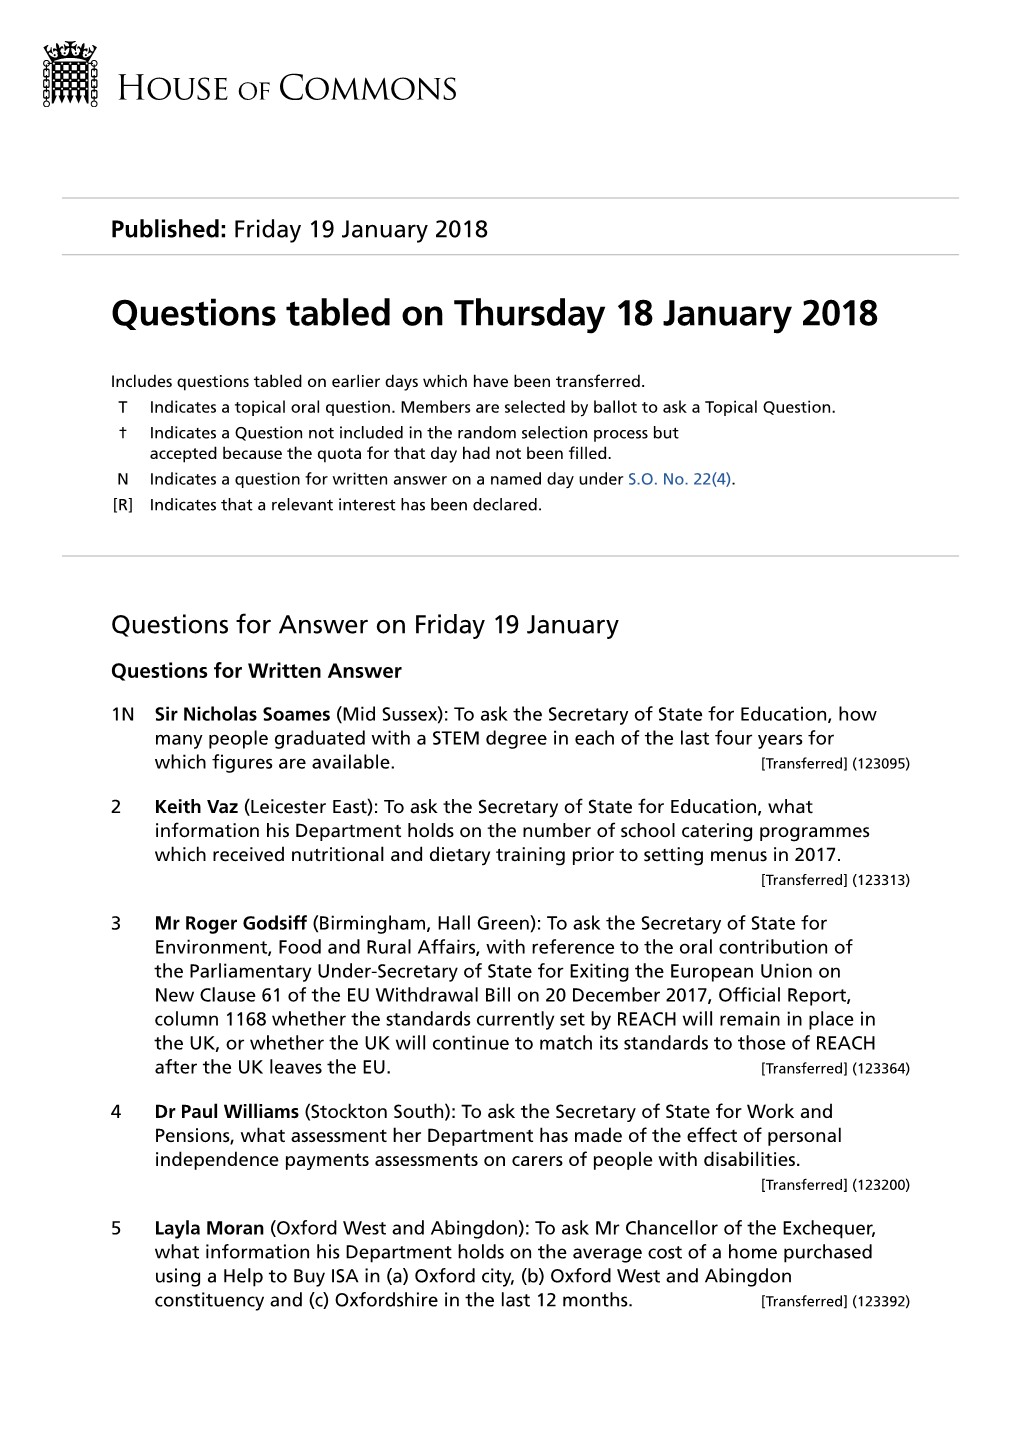 Questions Tabled on Thursday 18 January 2018